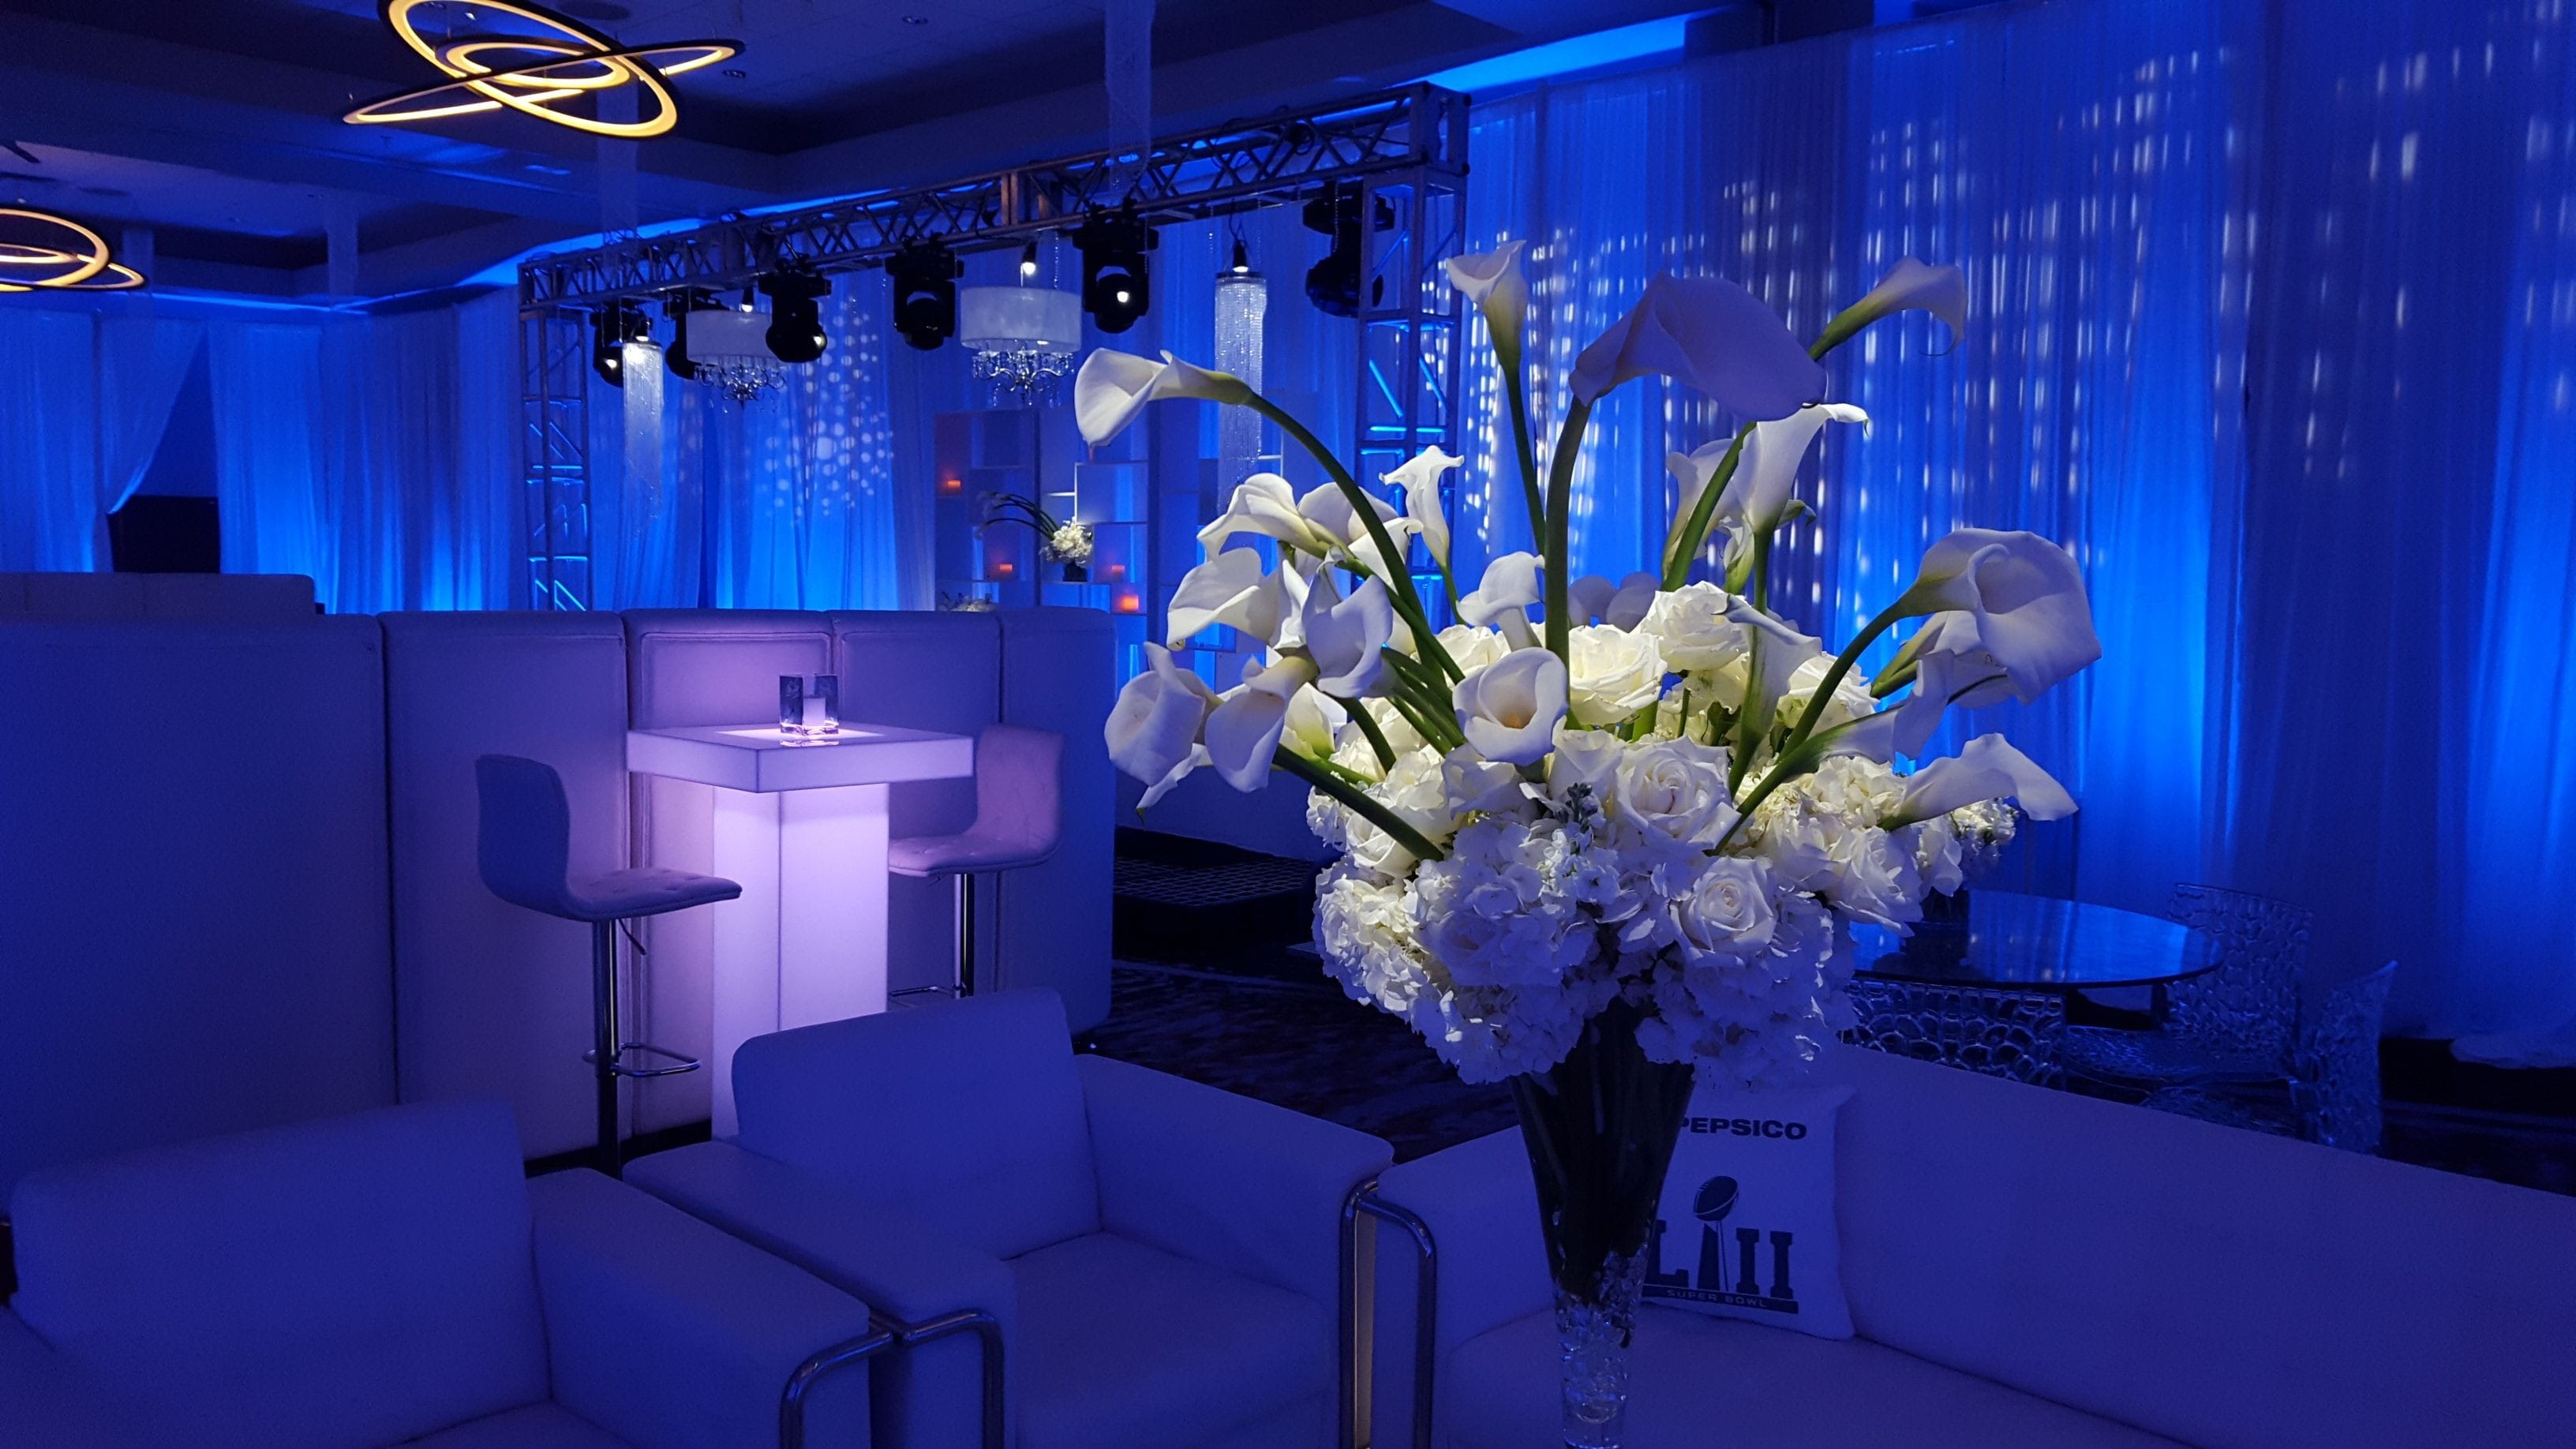 Minneapolis Depot,
Super Bowl party. Decor by Event Lab, Lighting by Duluth Event Lighting.